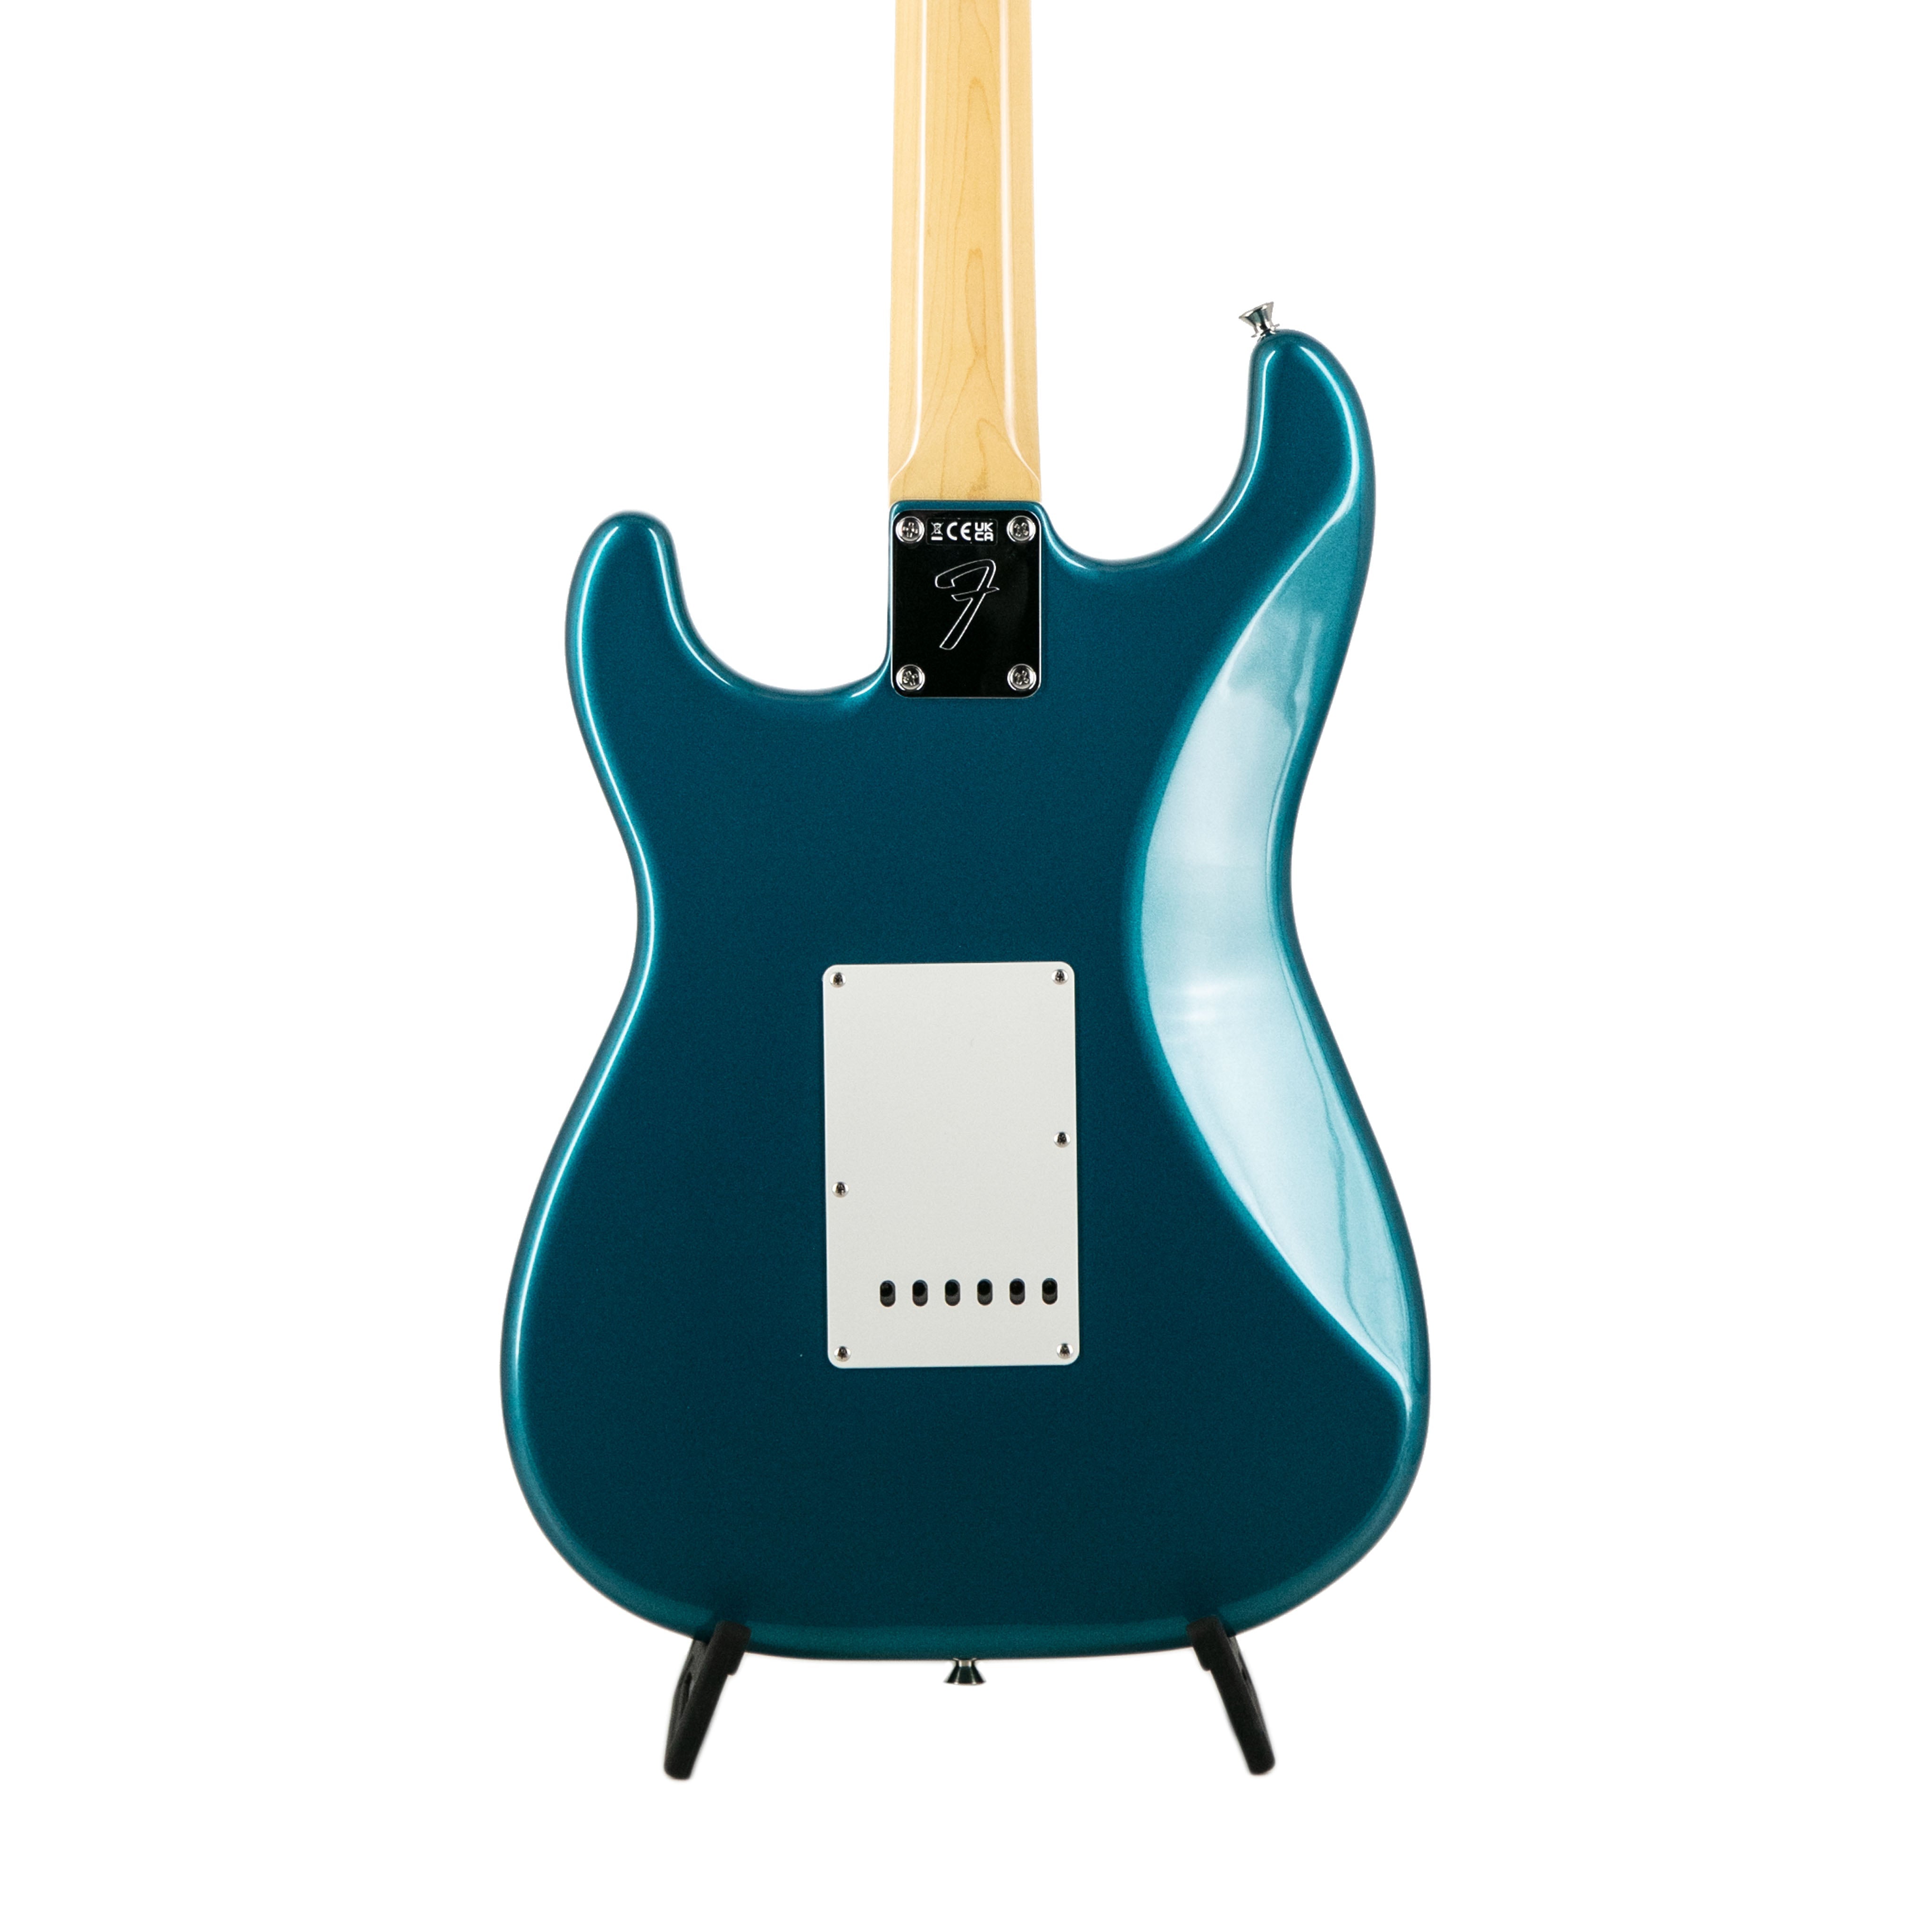 Fender FSR Collection Traditional Late 60s Stratocaster Guitar, RW FB, Ocean Turquoise Metallic